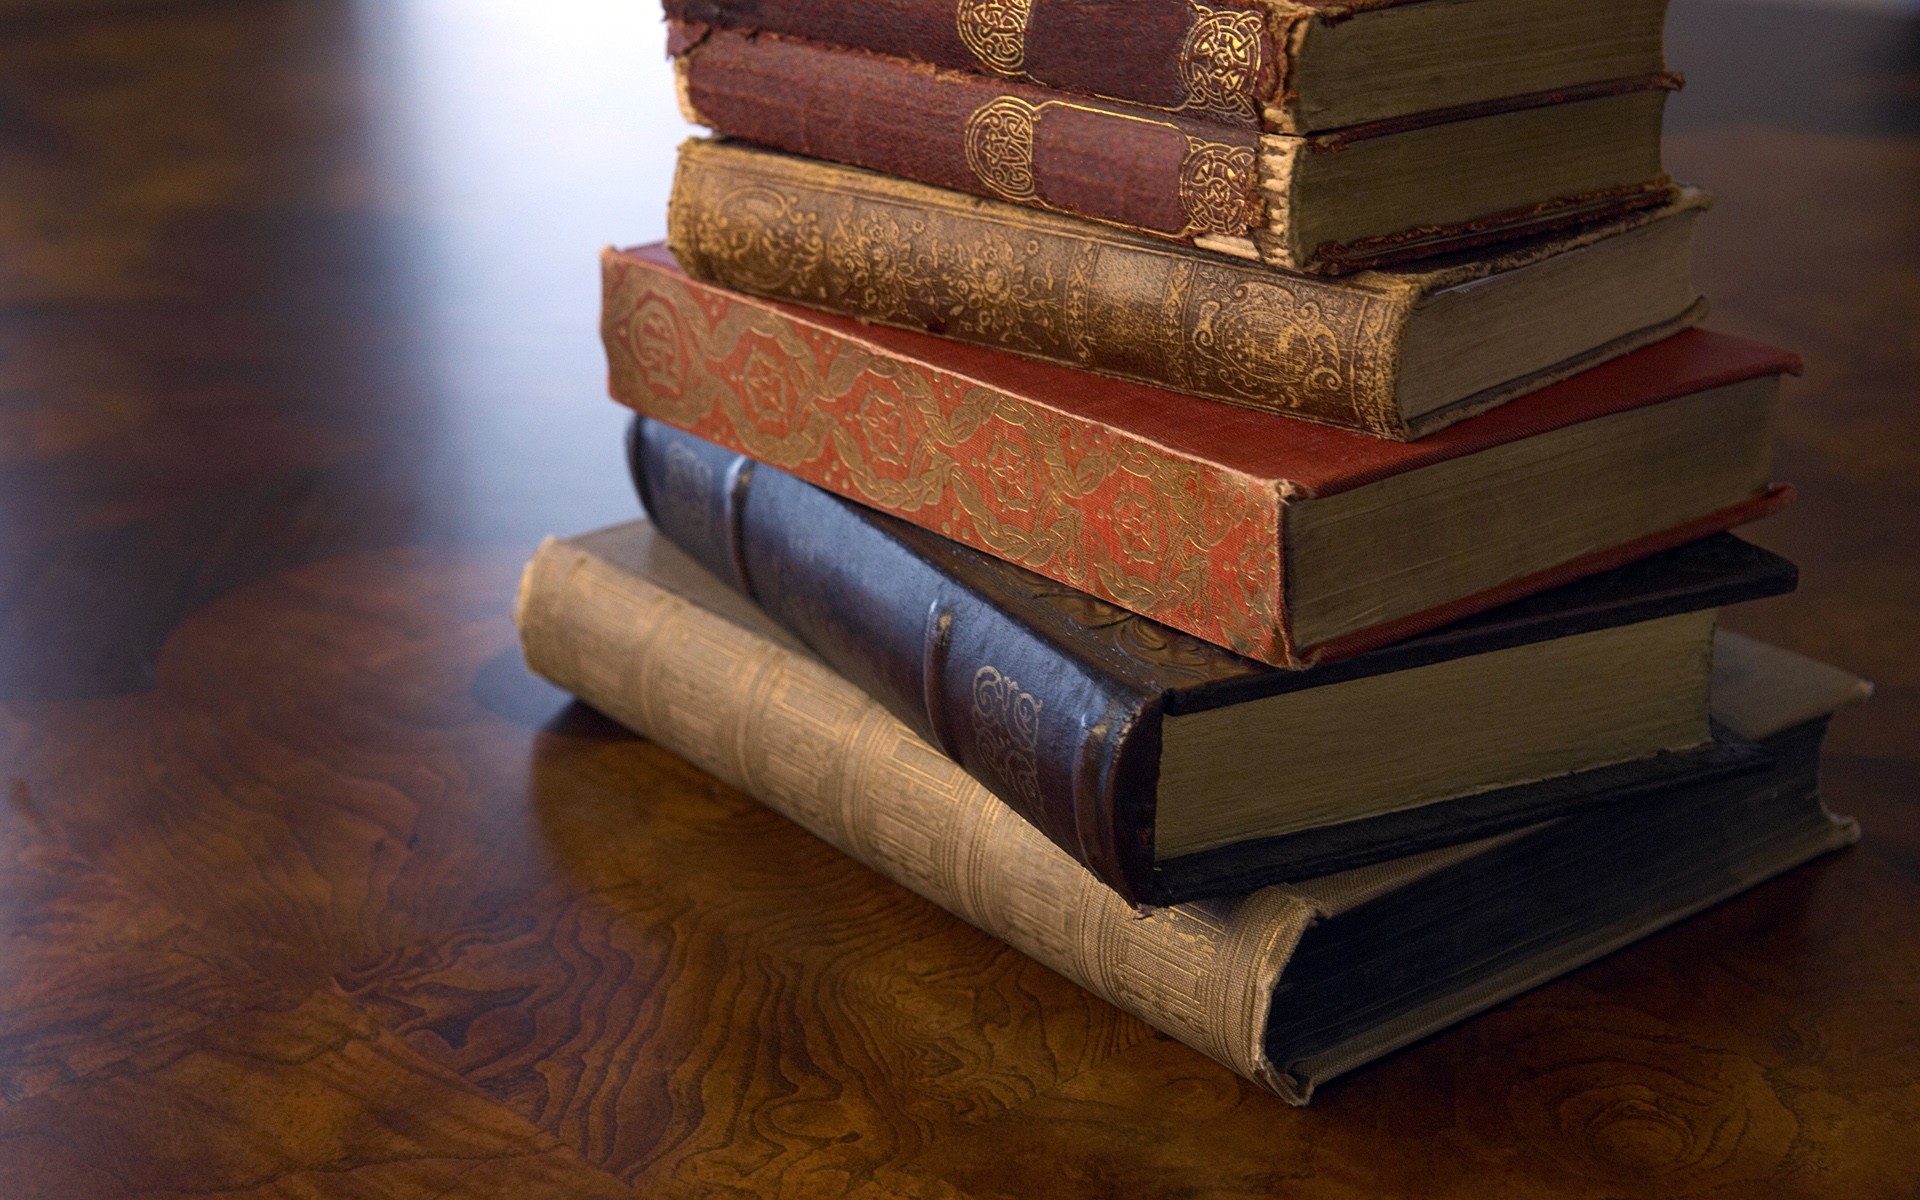 General 1920x1200 books wooden surface old paper closeup